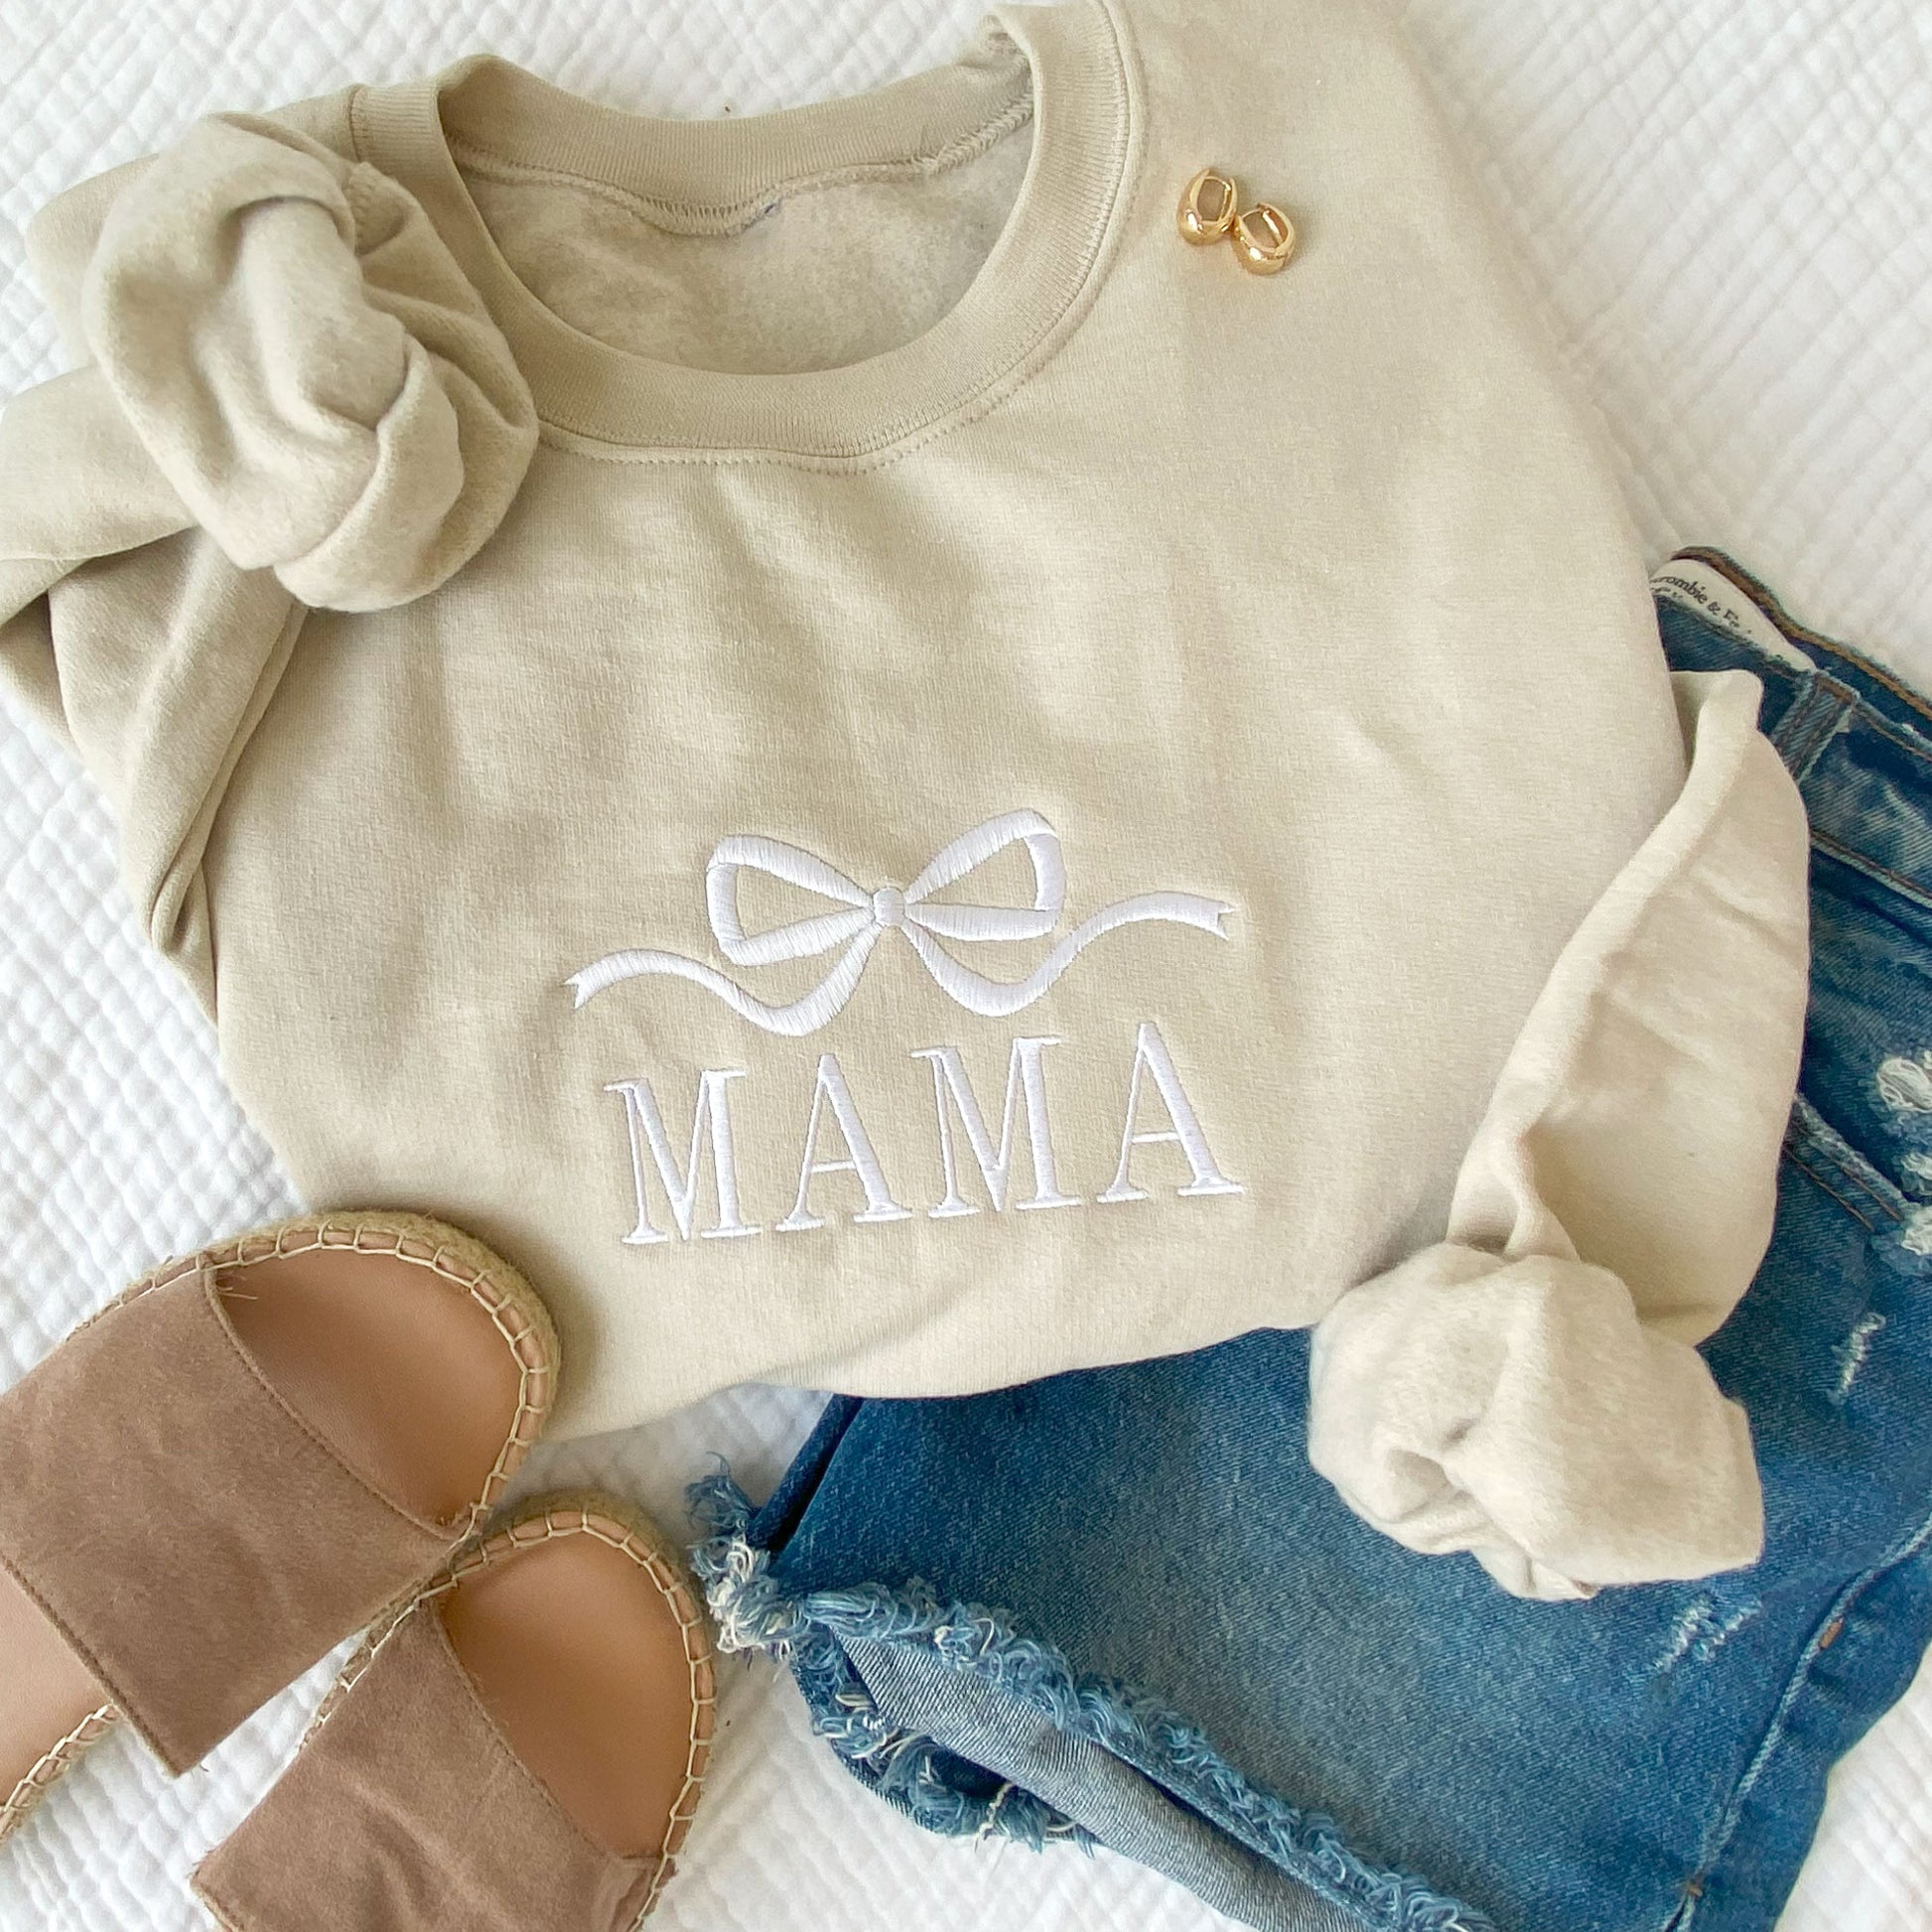 styled flat lay of a sand crewneck sweatshirt with jeans and sandals. On the crewneck is embroidered Bow and mama design in white thread